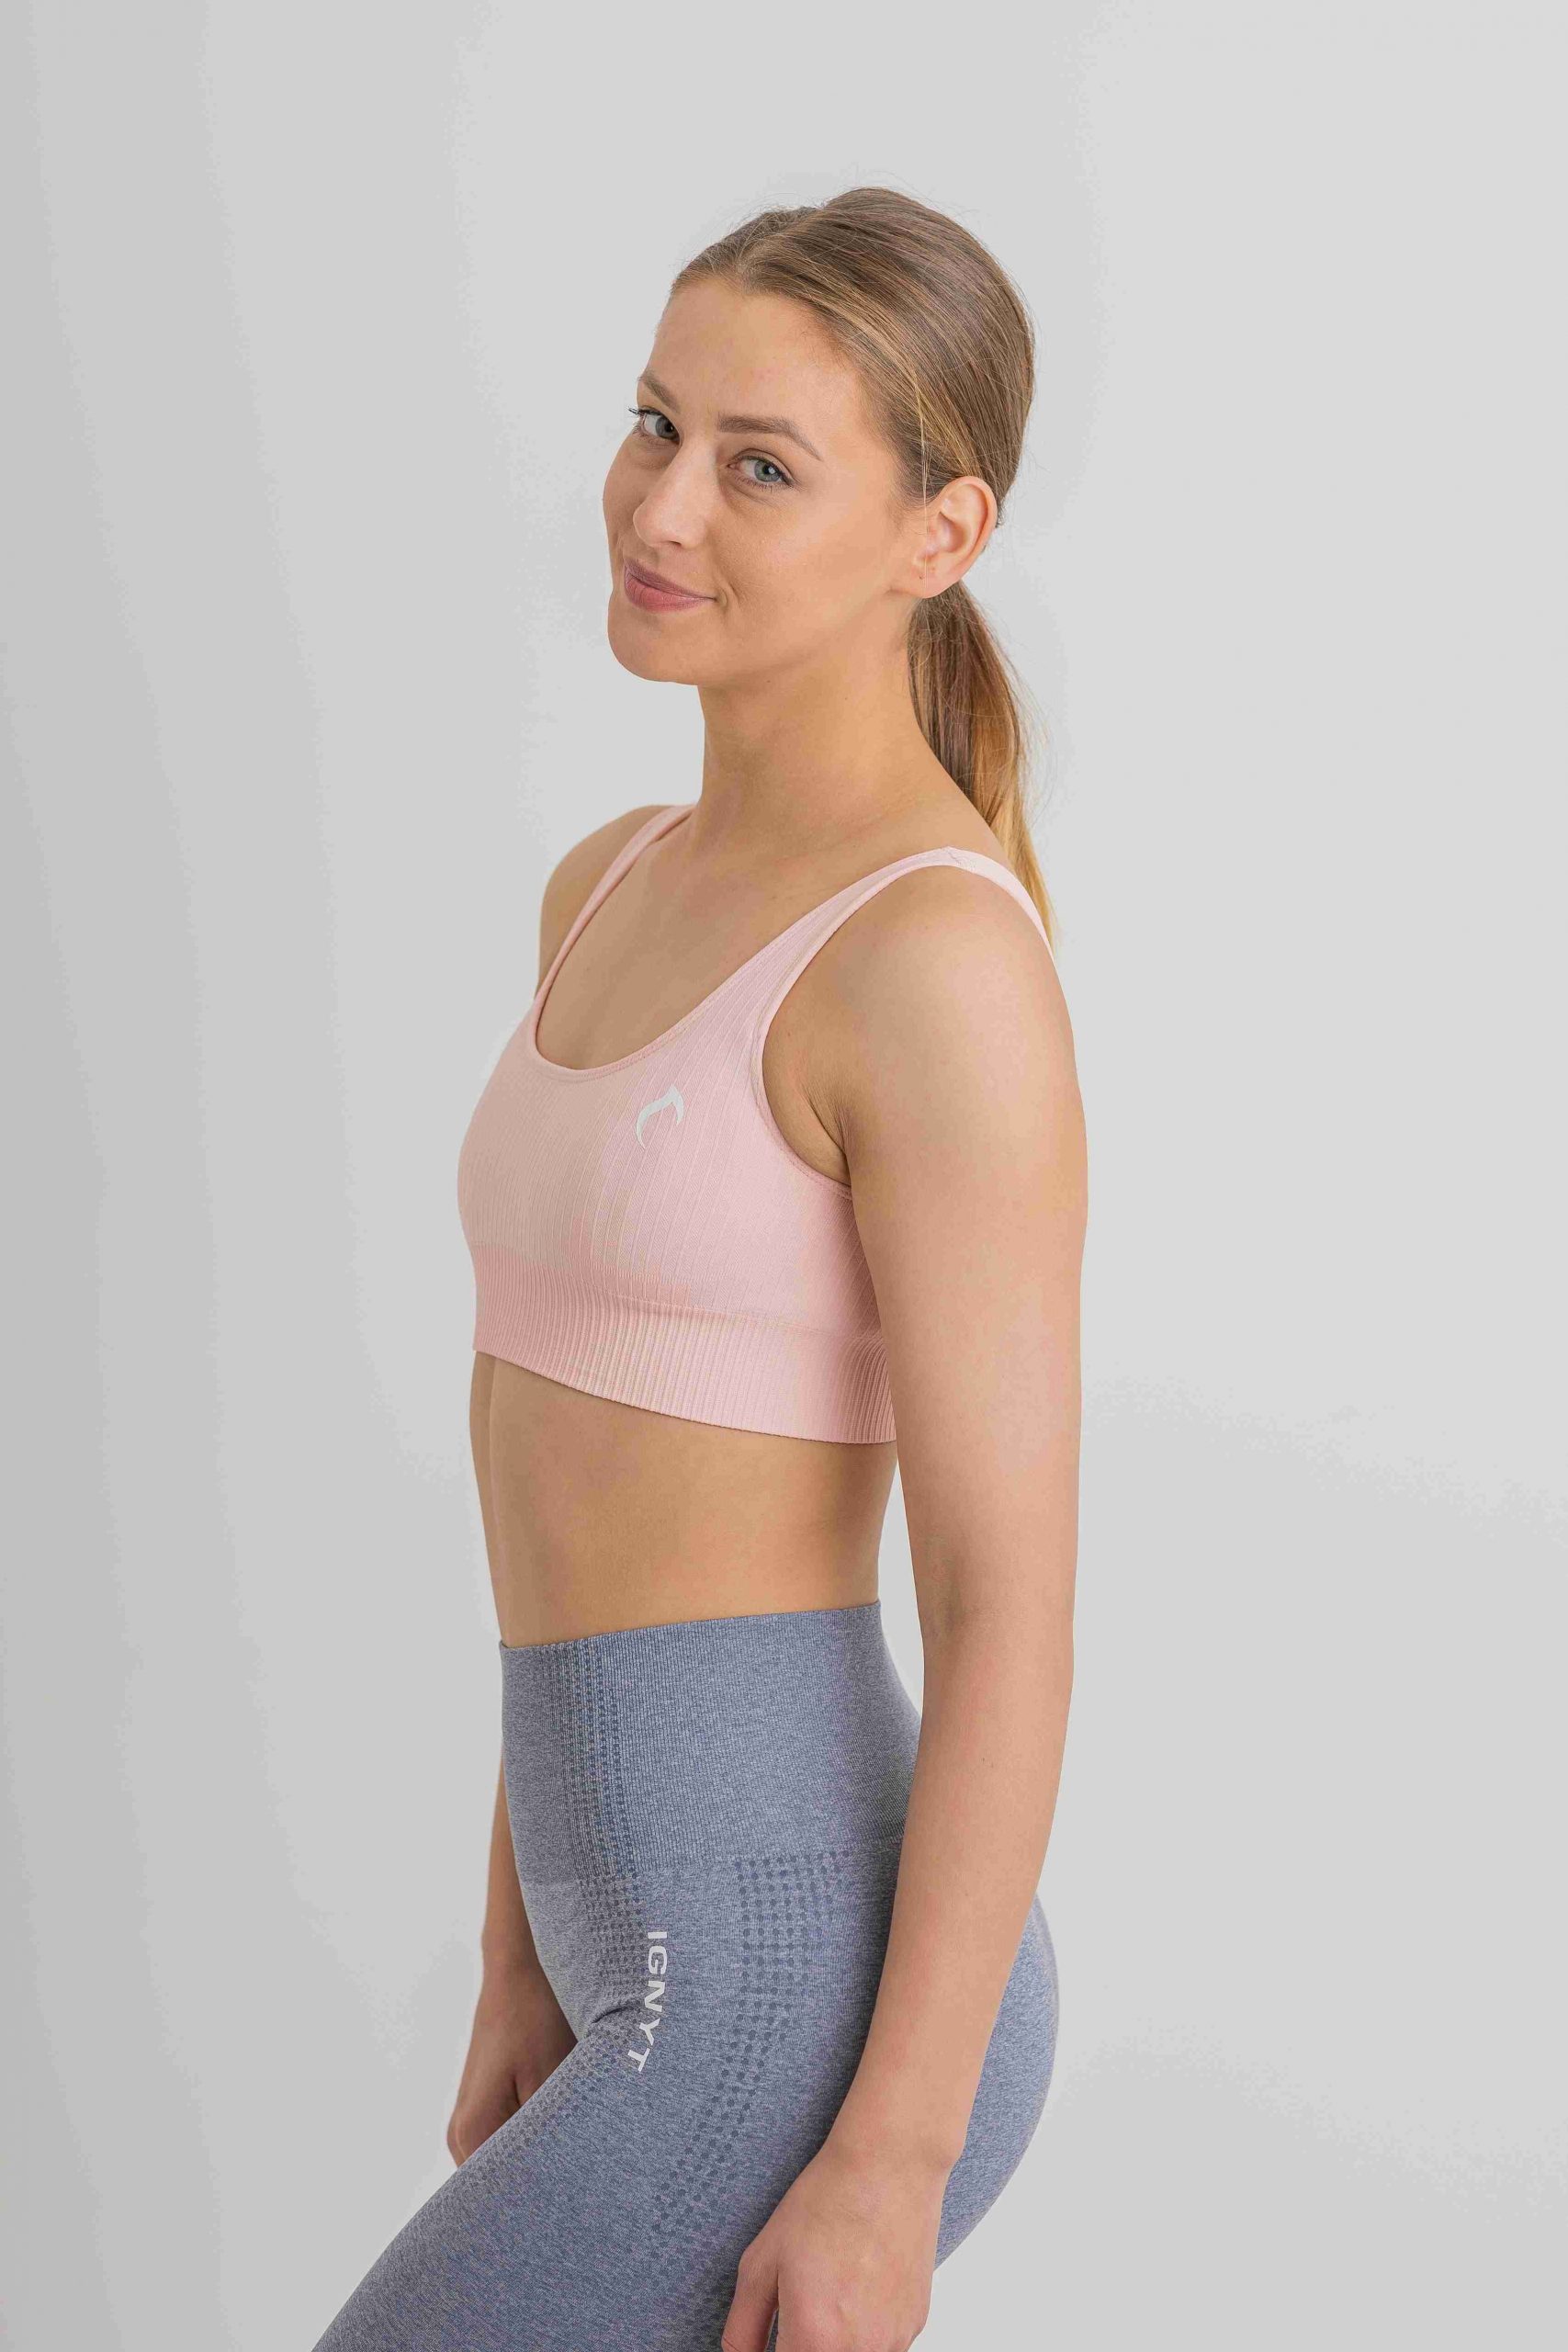 RYBBED Open Back Sports Bra in Baby Pink - IGNYT